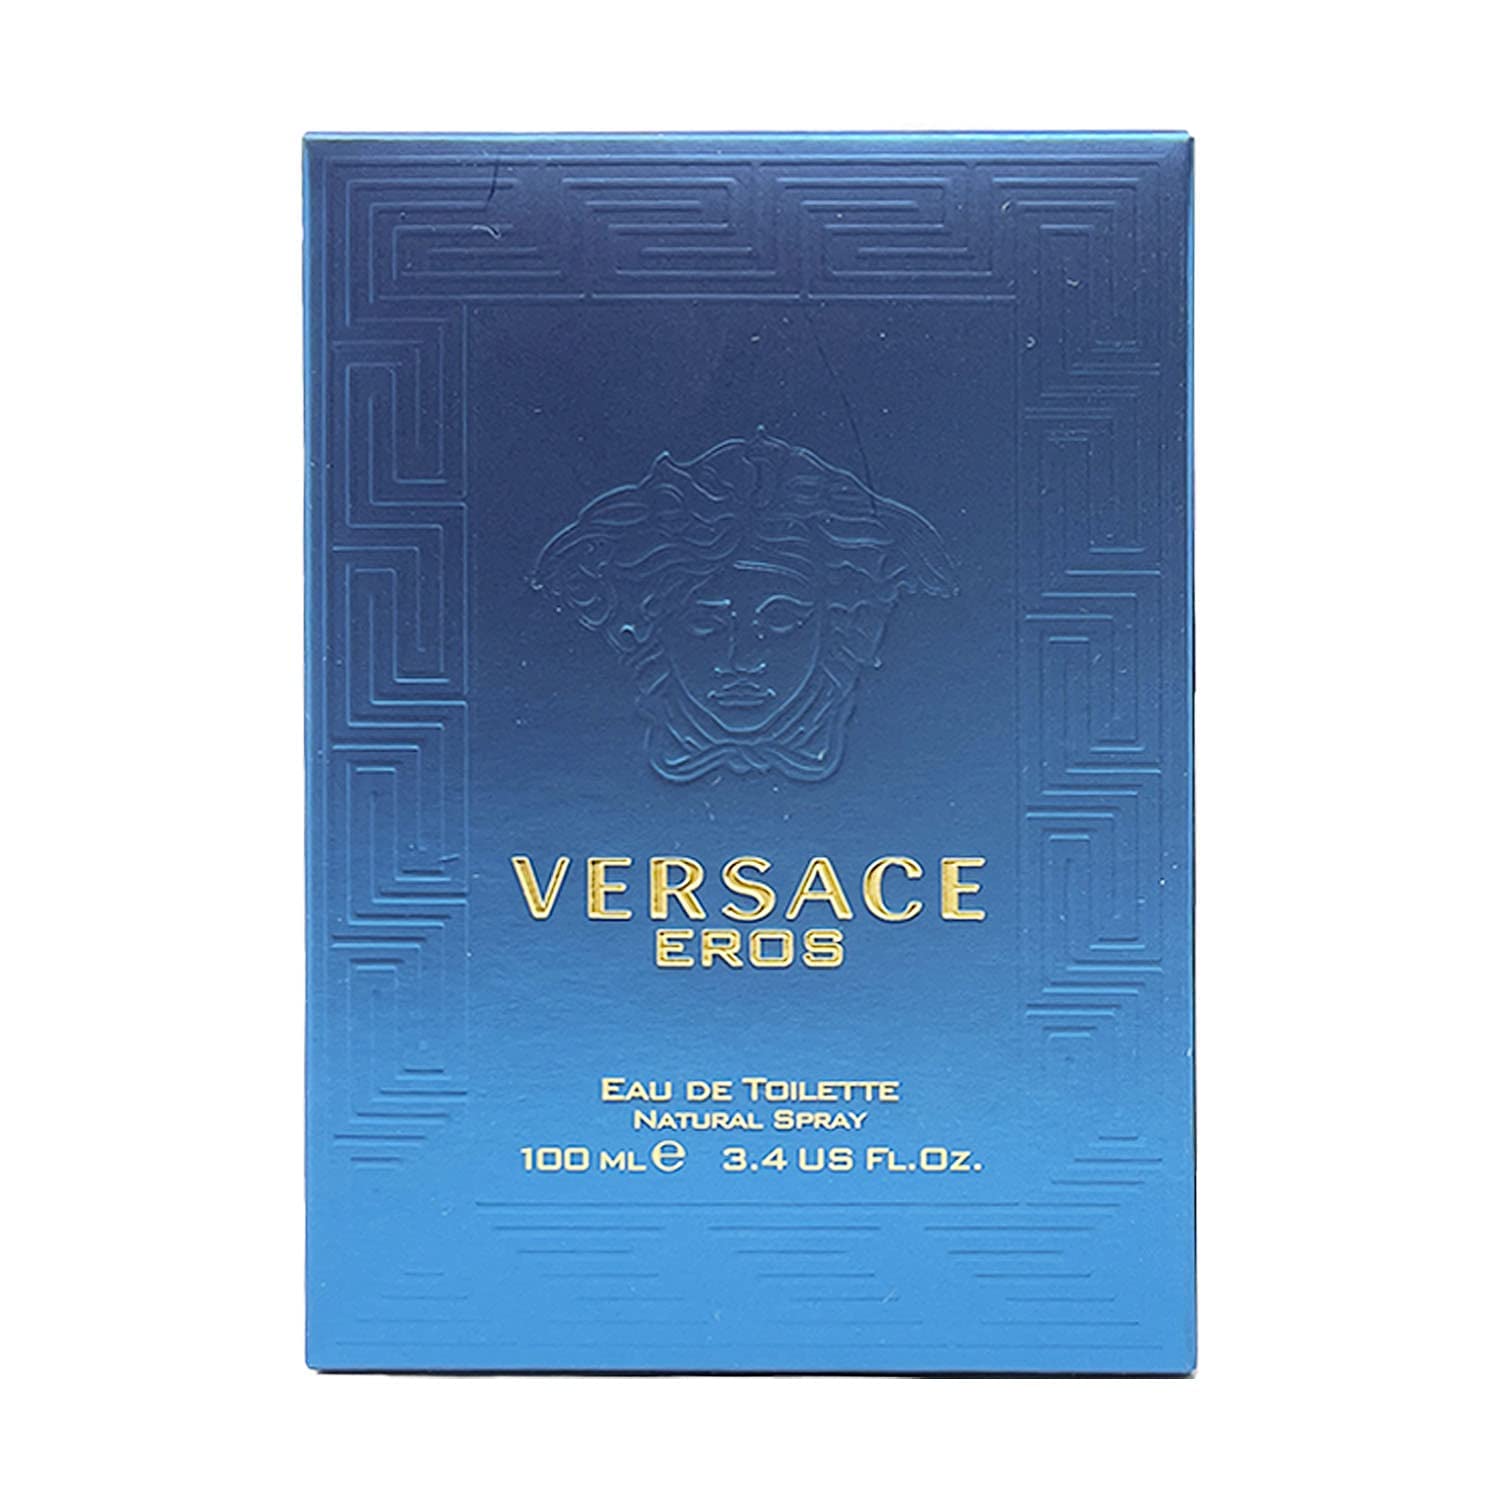 Versace エロス フォーメン 3.4 オンス EDT スプレー by Gianni